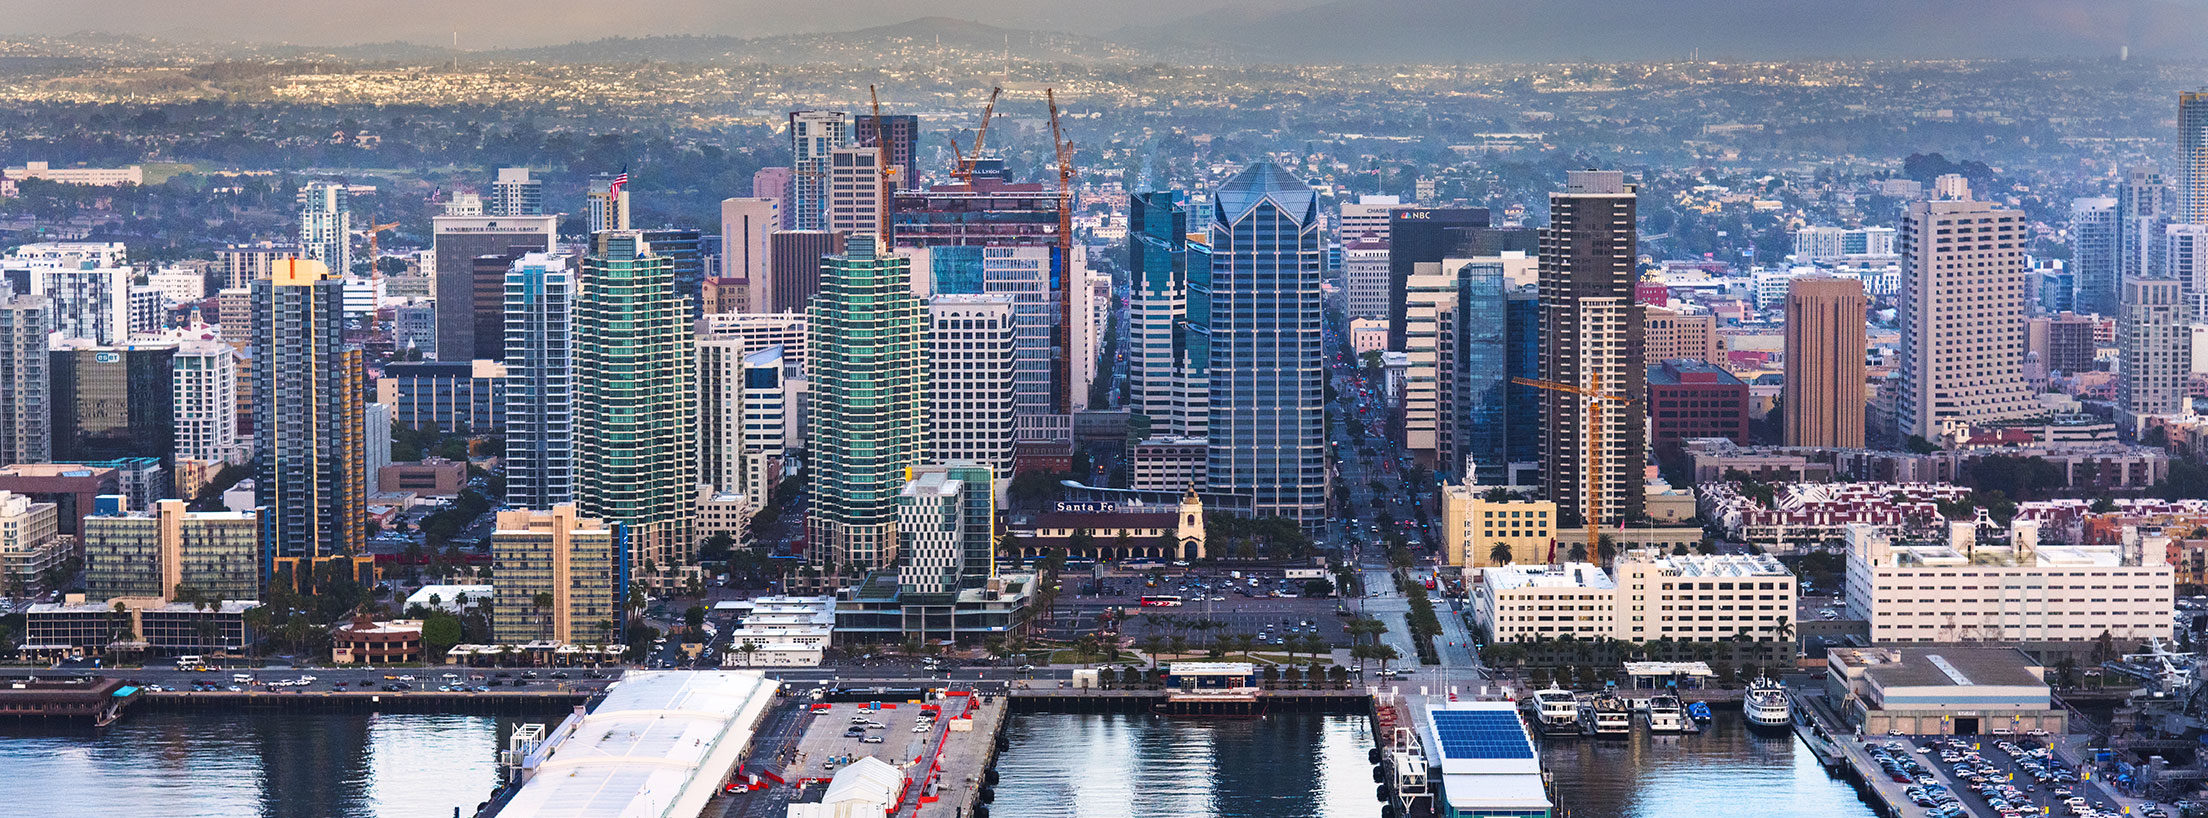 San Diego skyline from aerial view